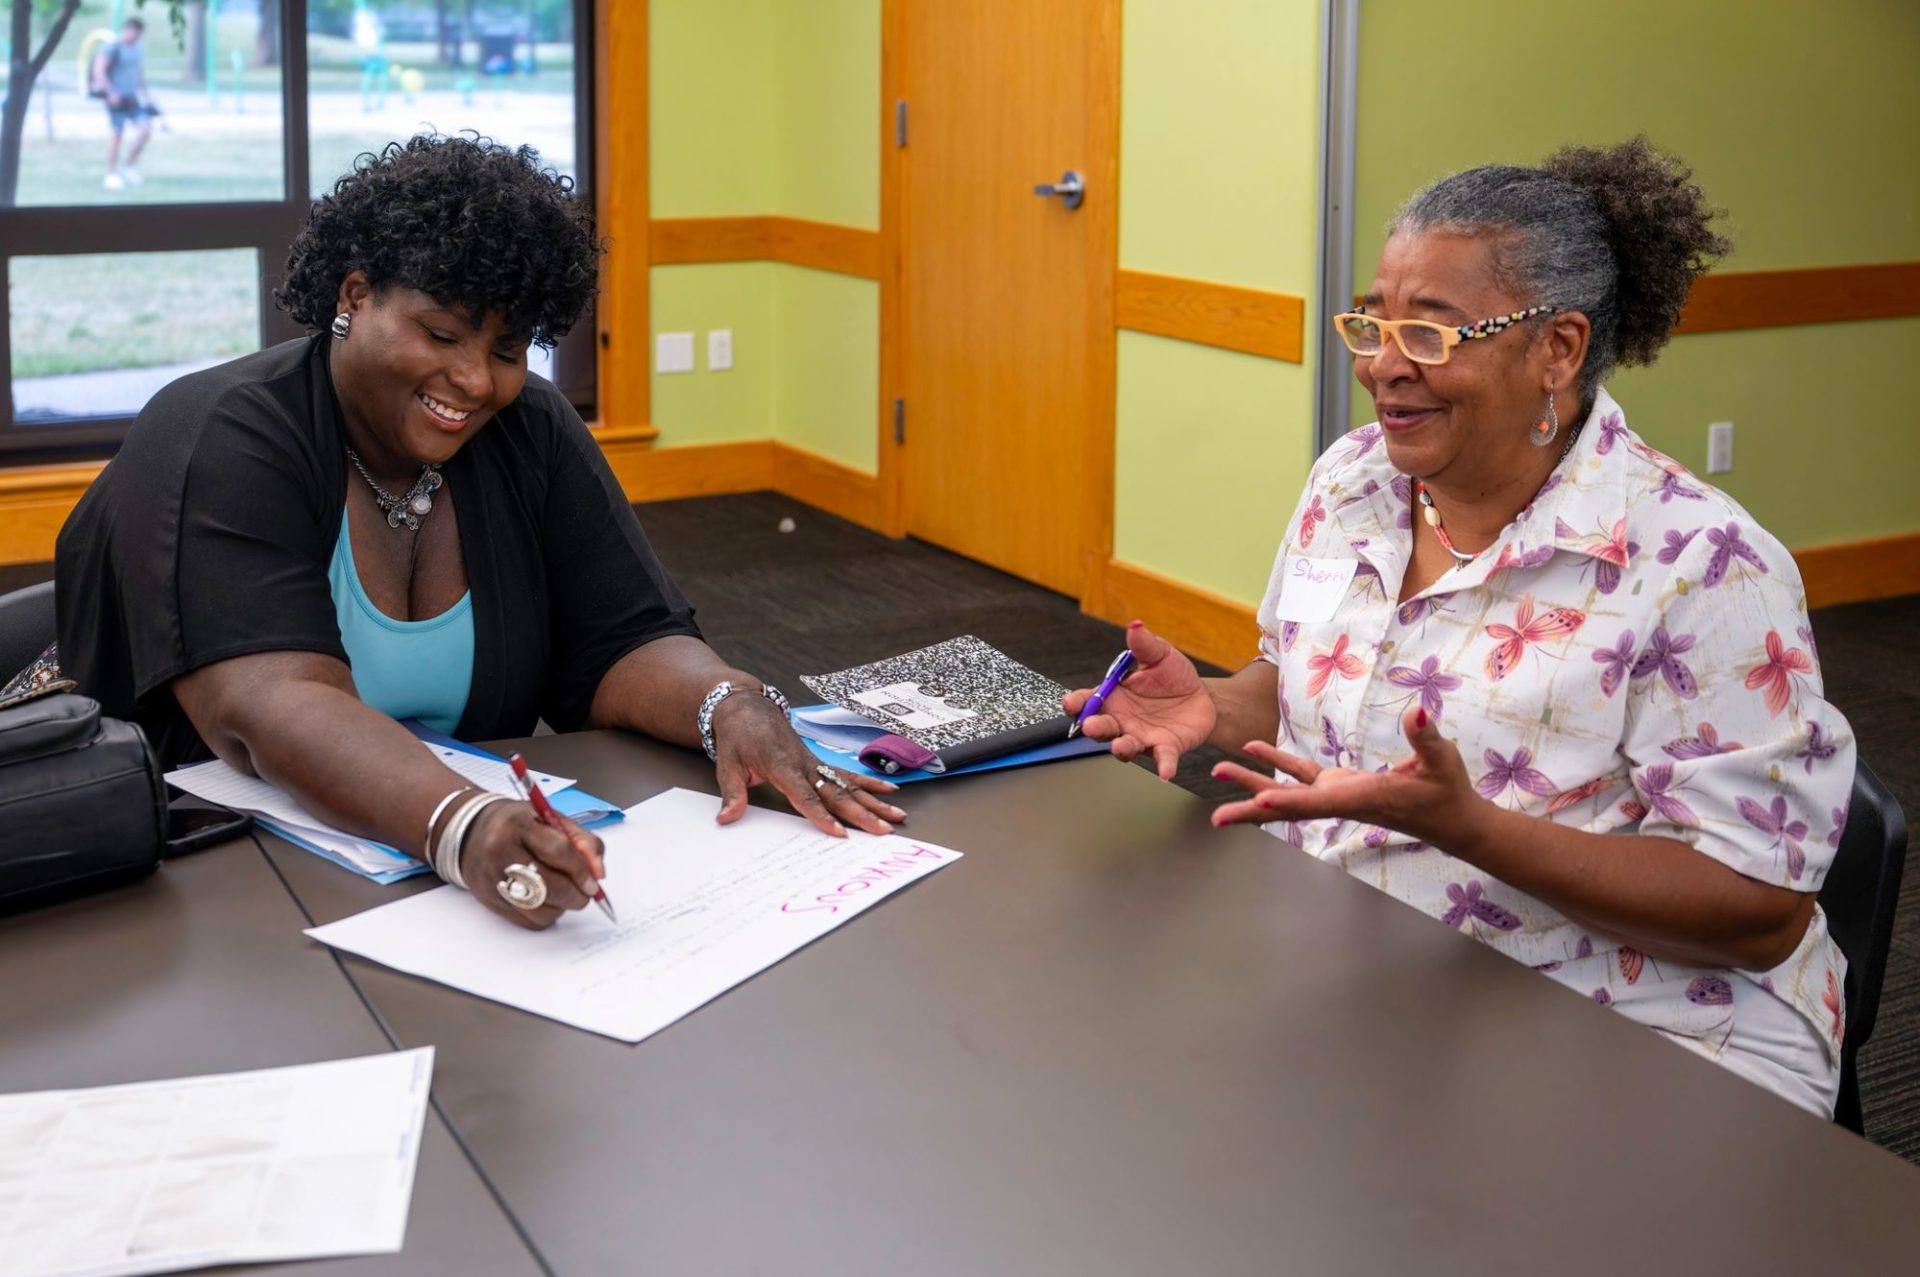 A younger Black woman and older Black woman are sitting across from one another at a table. The younger woman is writing on a large piece of paper.